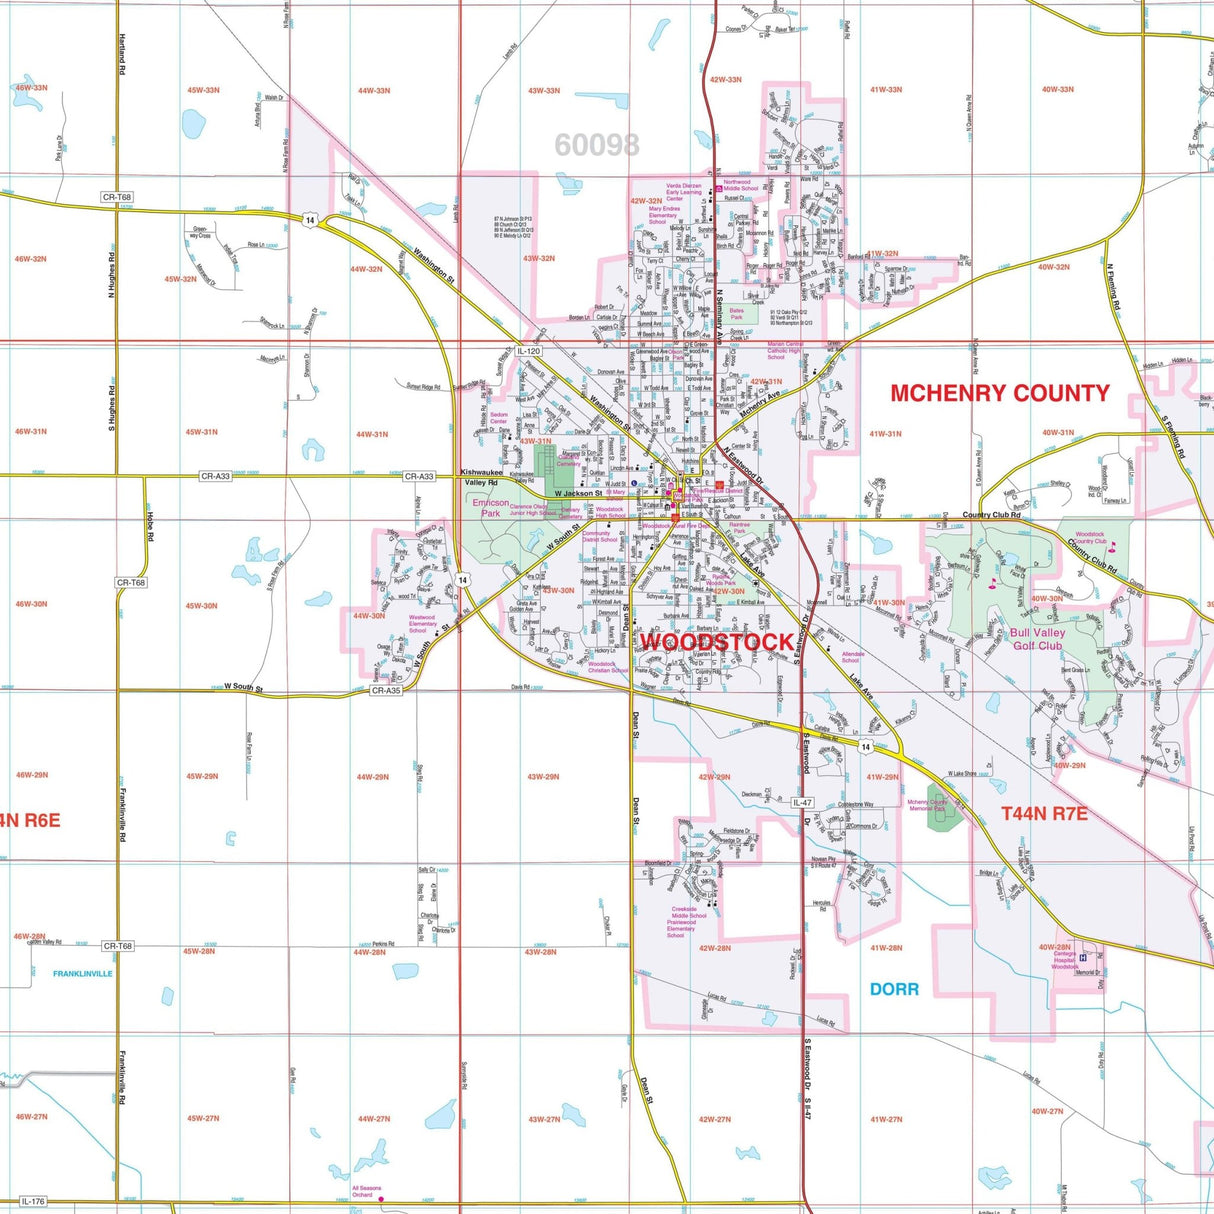 McHenry County, IL Wall Map - KA-C-IL-MCHENRY-PAPER - Ultimate Globes